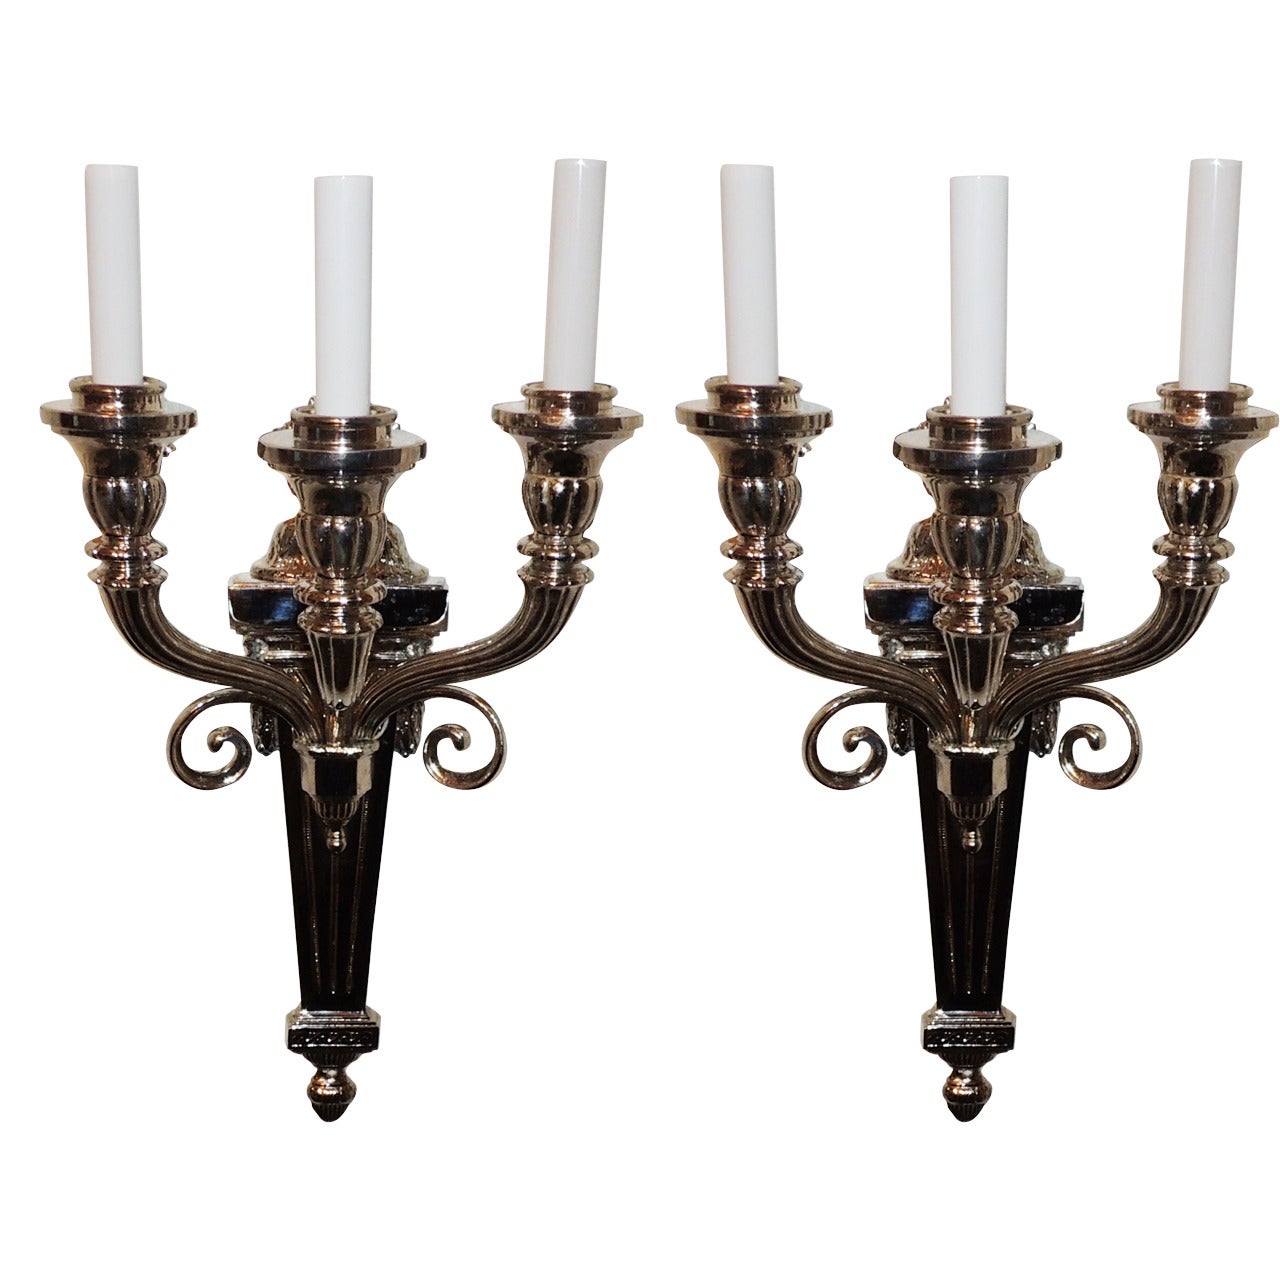 Neoclassical Nickel-Plated Three-Arm Sconces Attributed to Caldwell